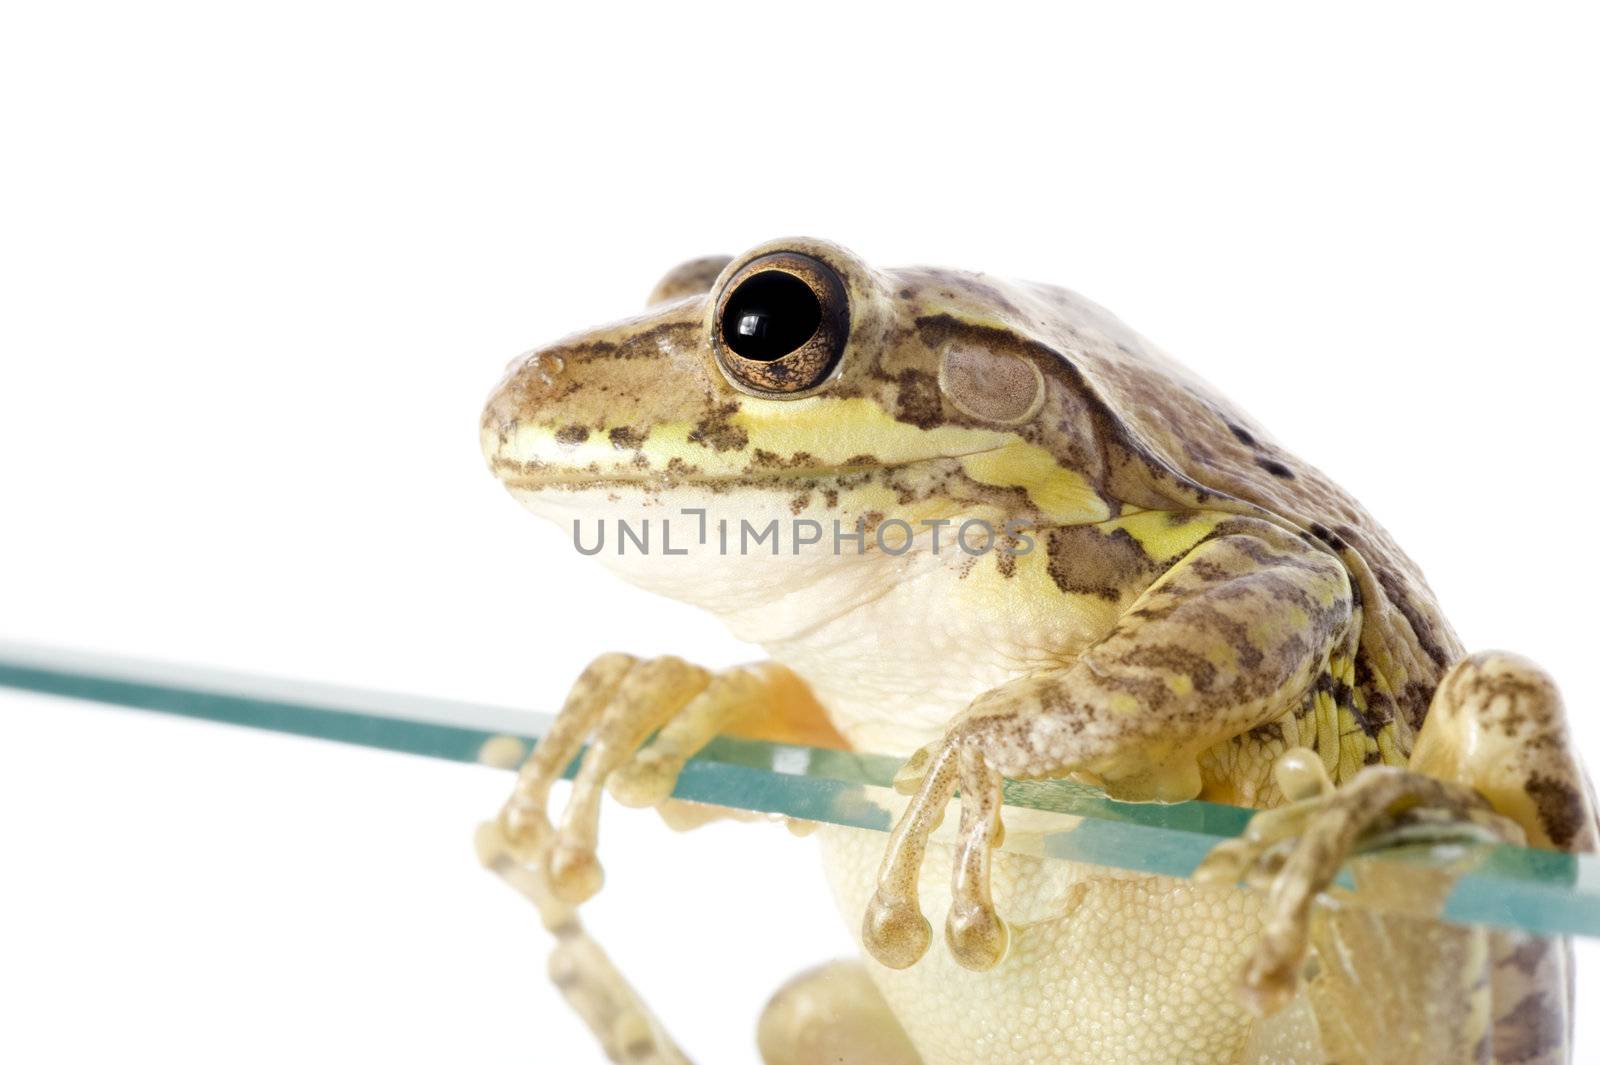 Cuban Tree Frog (Osteopilus septentrionalis), an invasive species in the United States, climbs over a glass wall. Conceptualizing the species invasion on a white background.